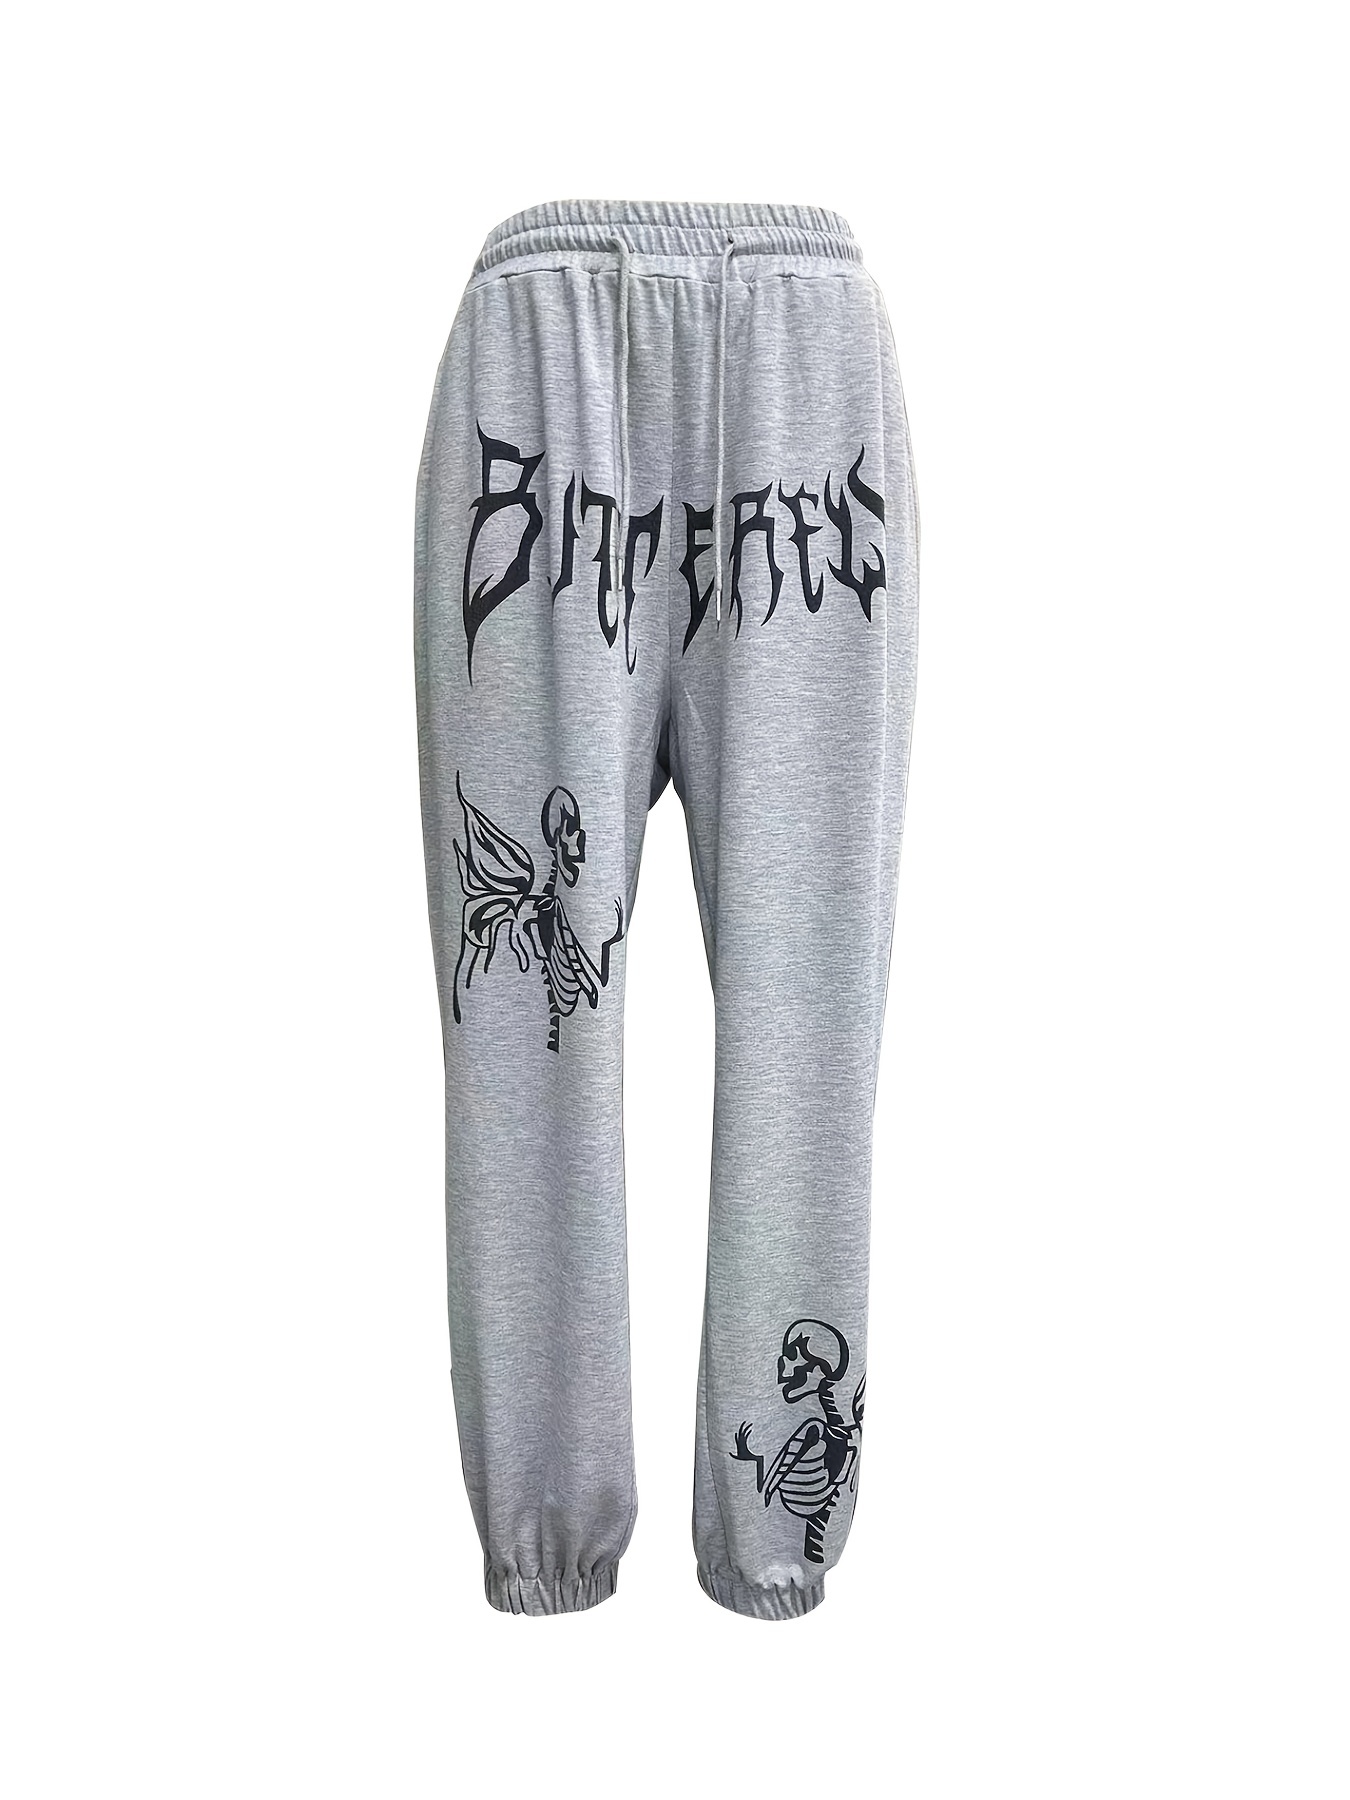 Elastic Waist Casual Sports Pants, Skull Graphic Halloween Sweatpants For  Jogging Running Workout, Women's Athleisure